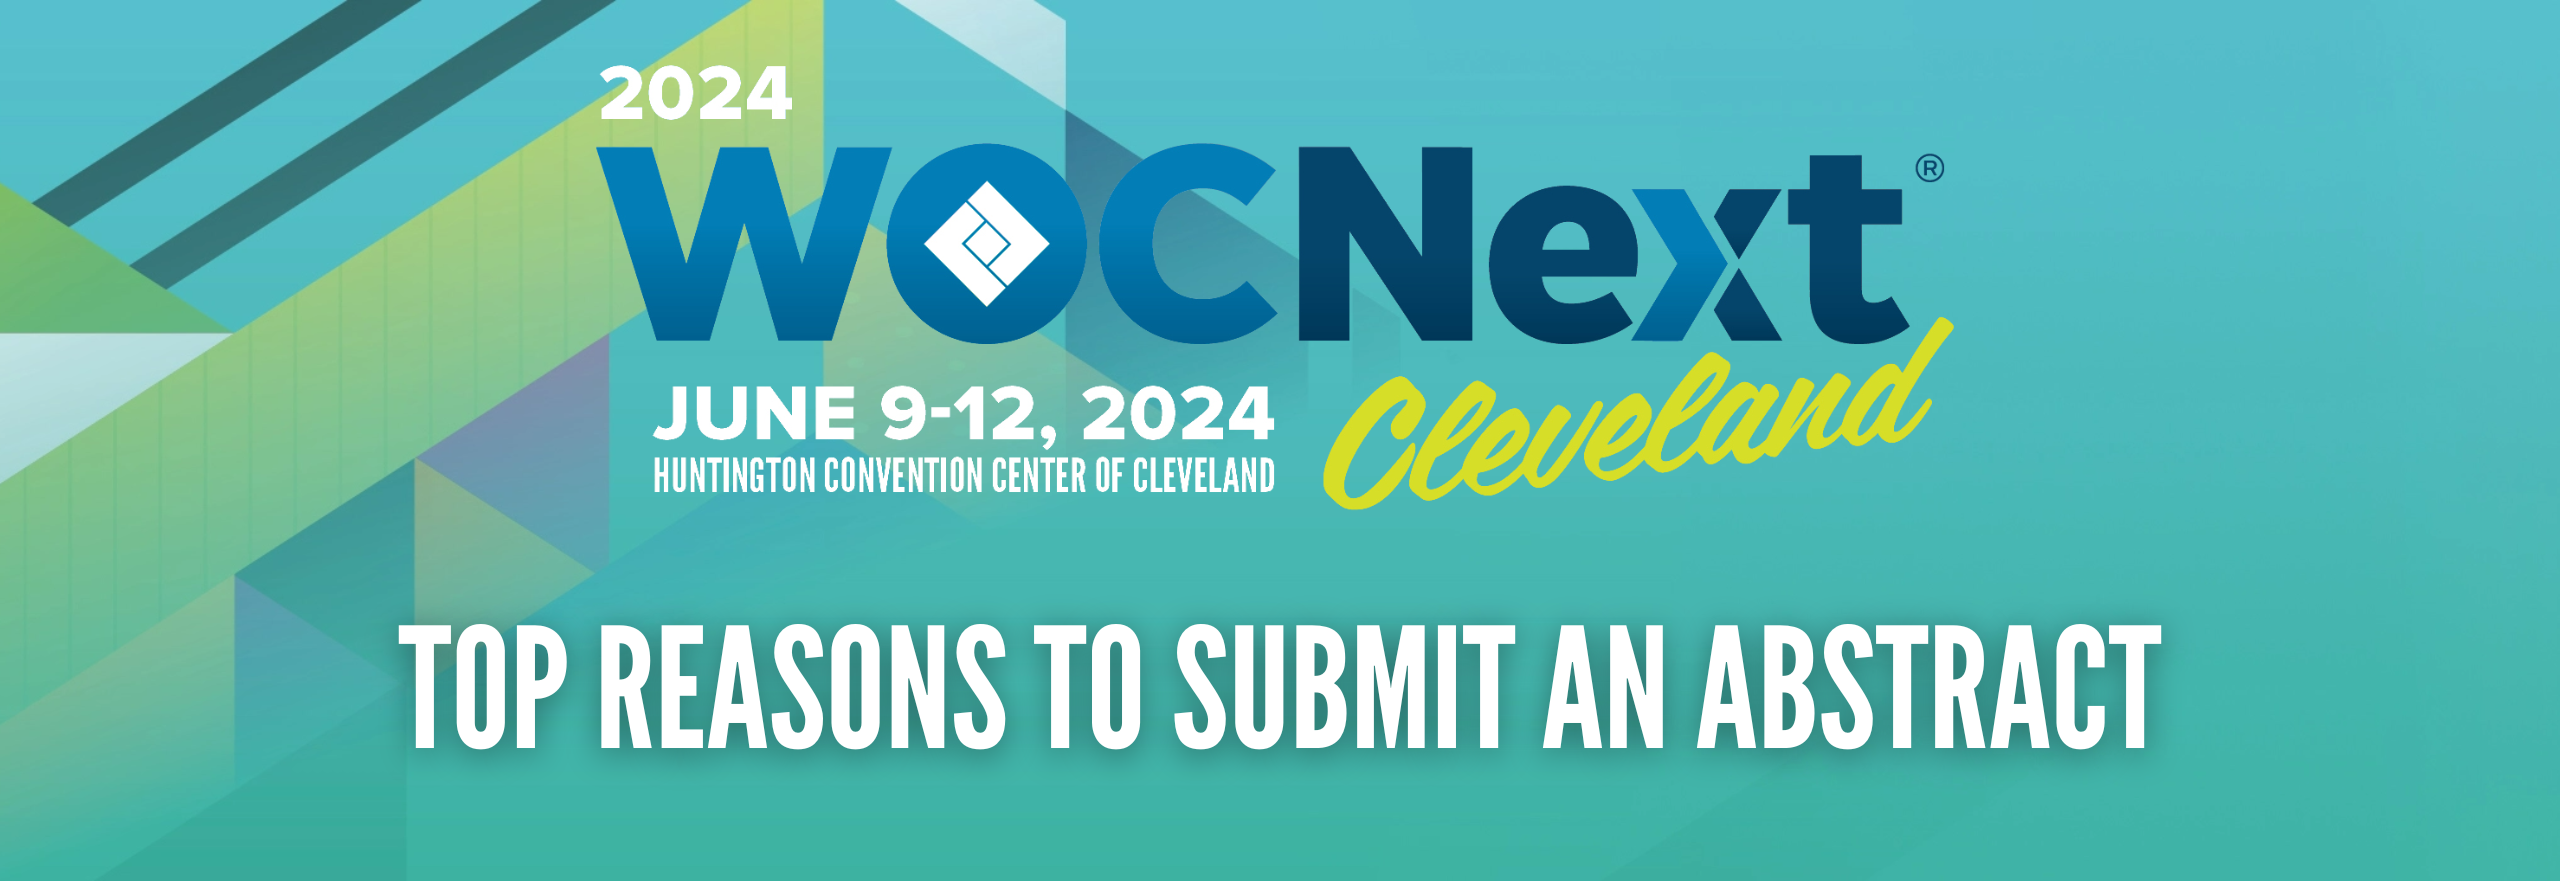 Top Reasons to Submit an Abstract for WOCNext® 2024 WOCN